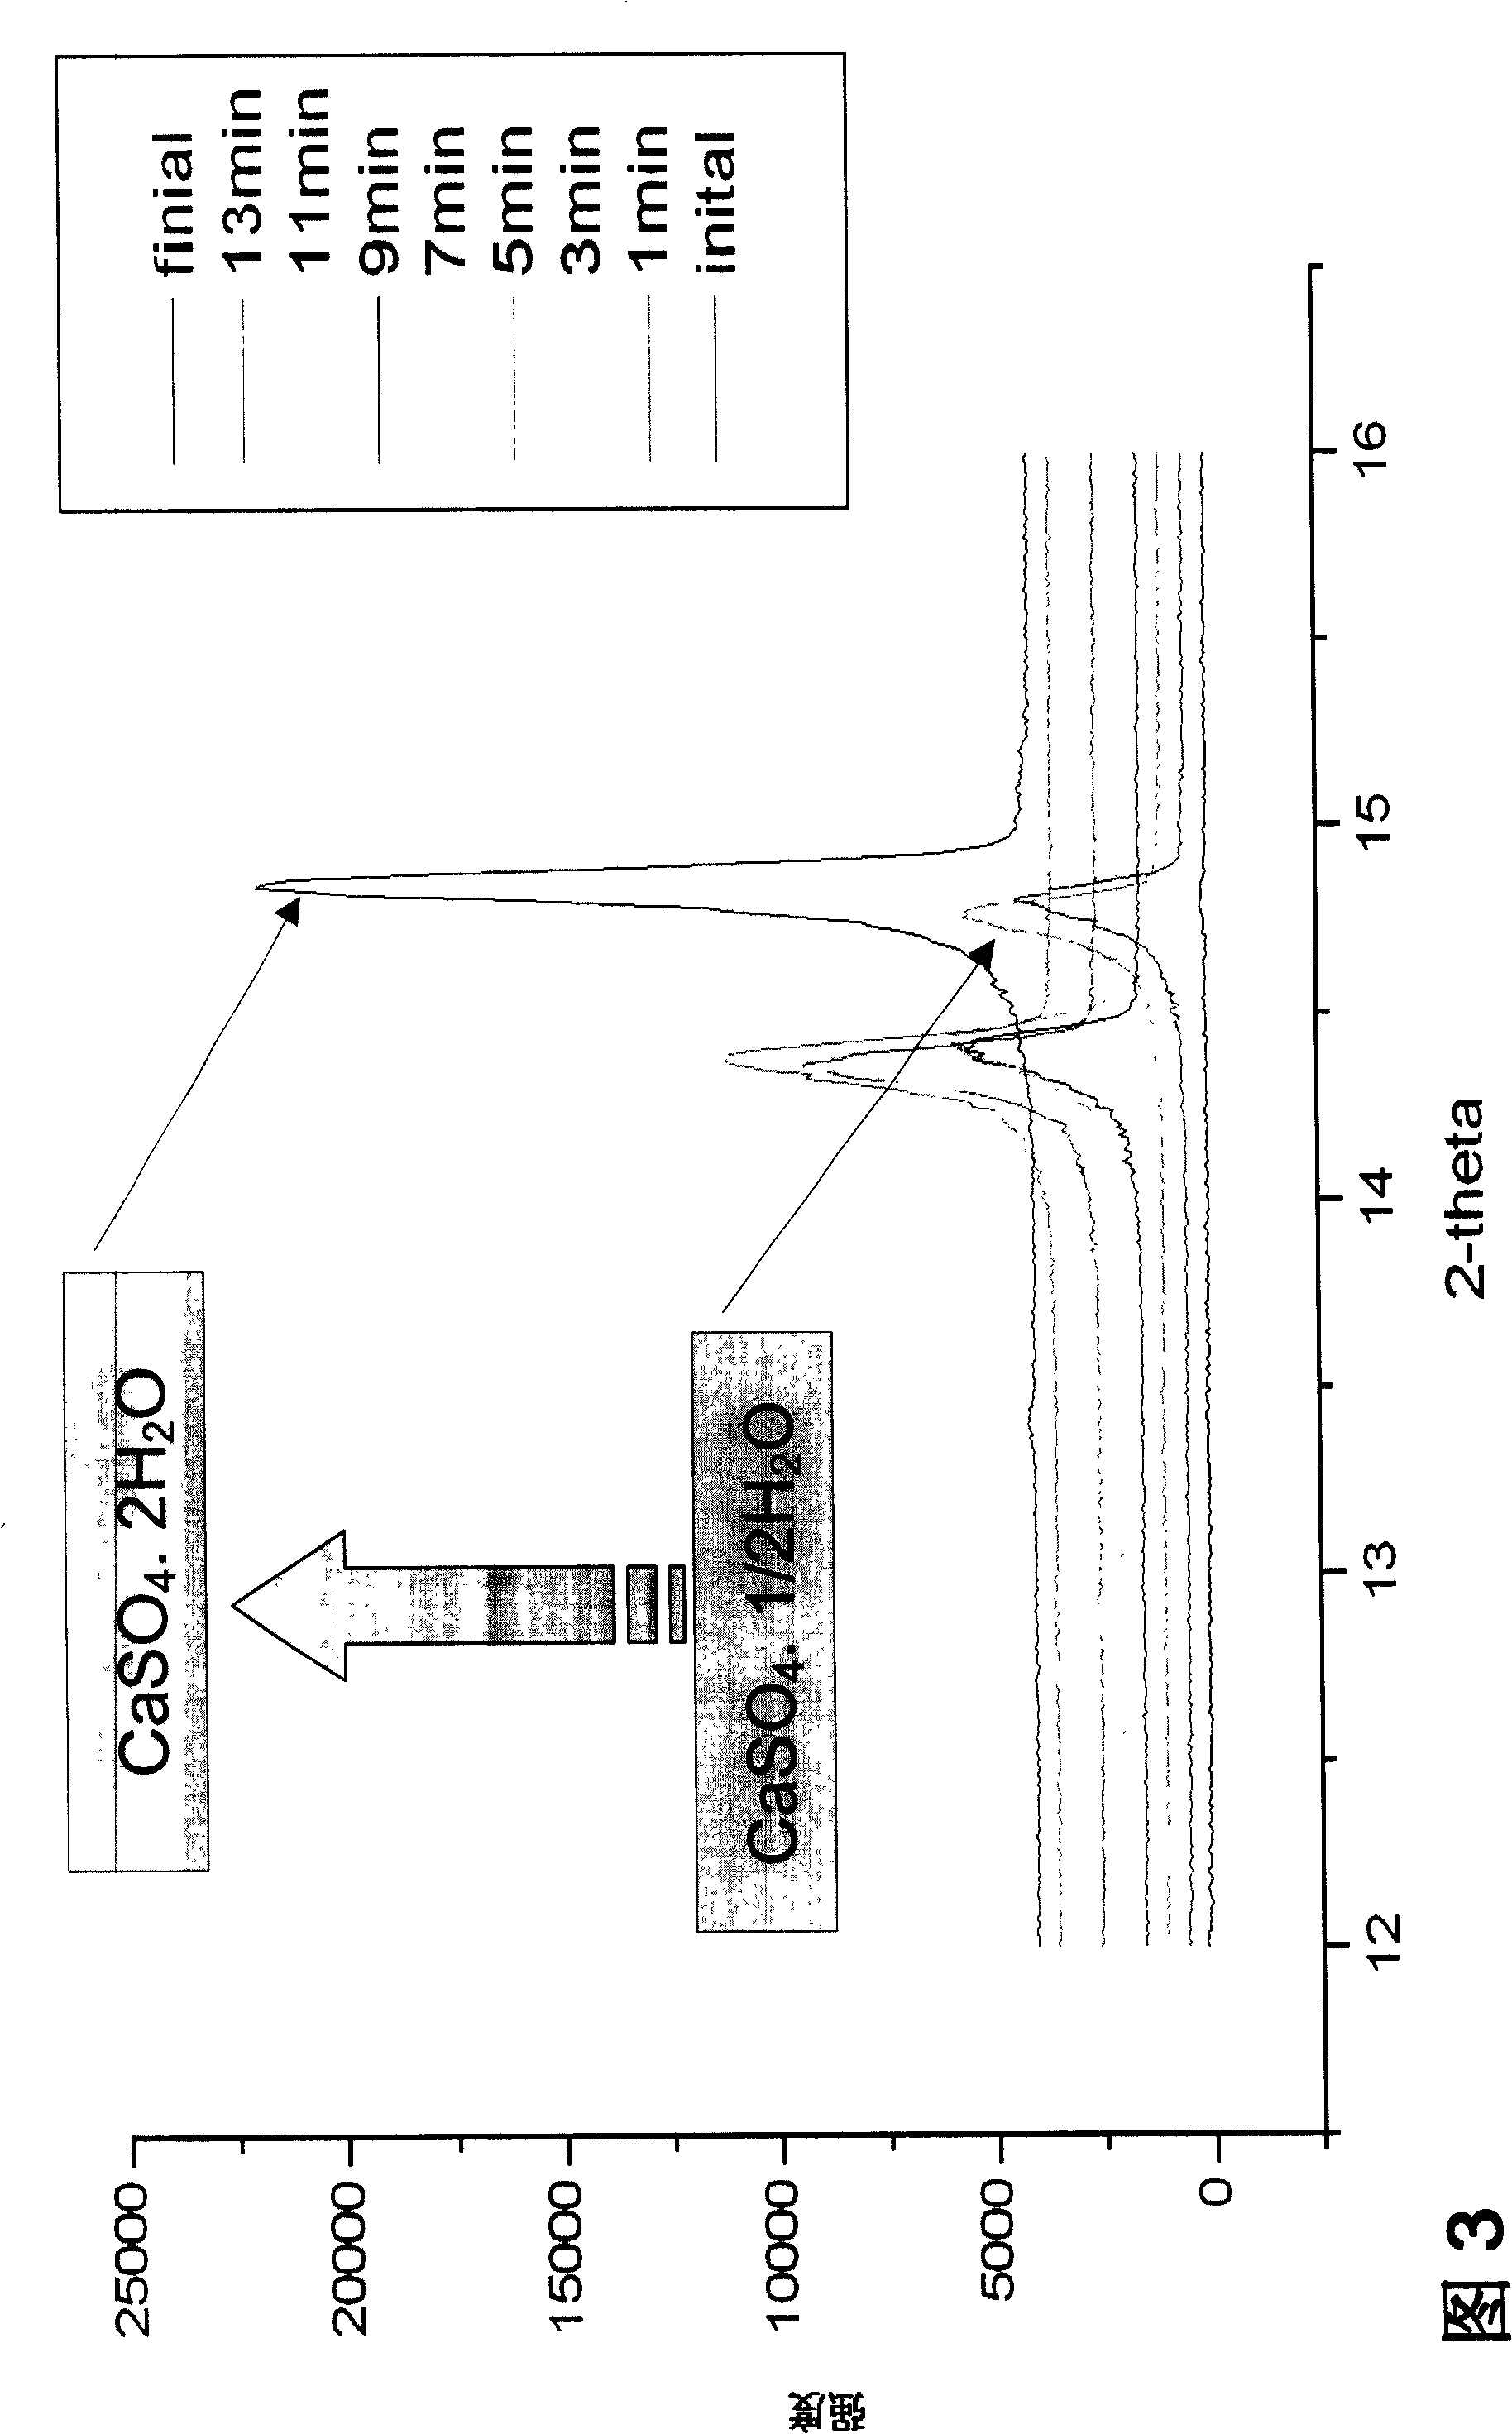 Method for controlling water-powder ratio of bone cement and hardening time